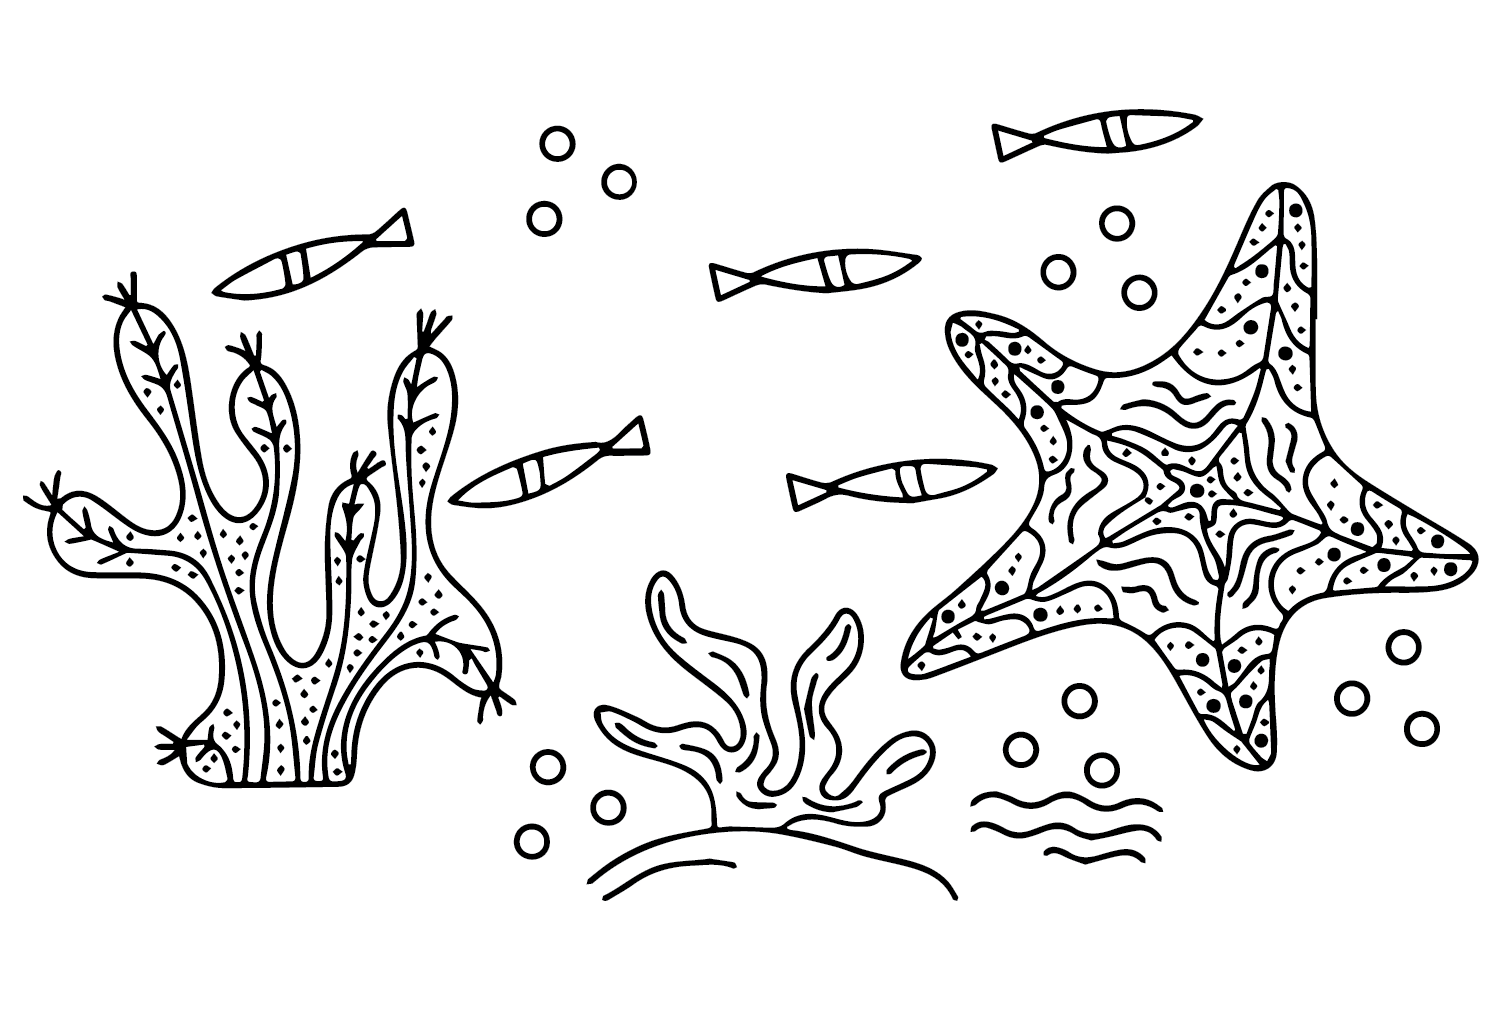 Starfish to Color from Starfish